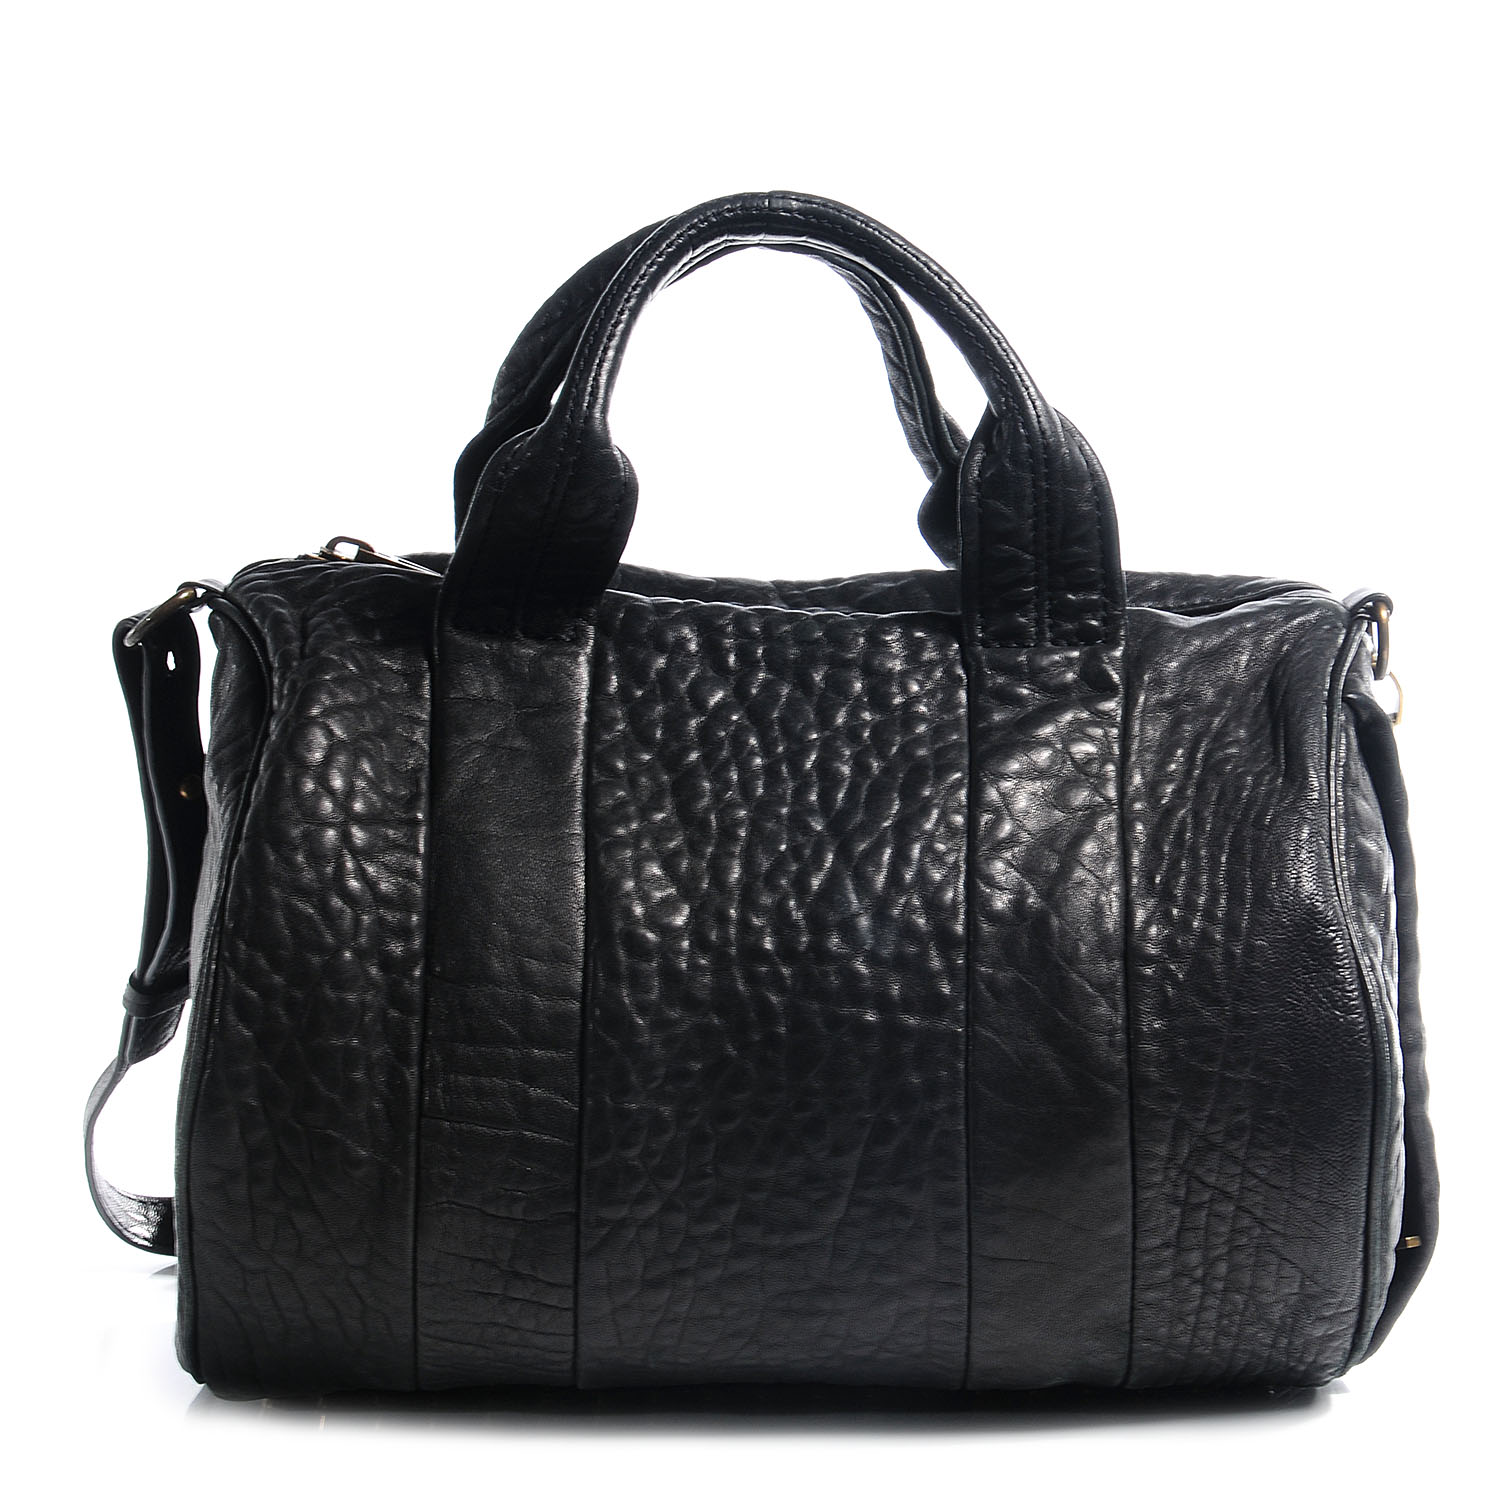 ALEXANDER WANG Leather Rocco Duffel Black With Antique Brass Hardware 62258